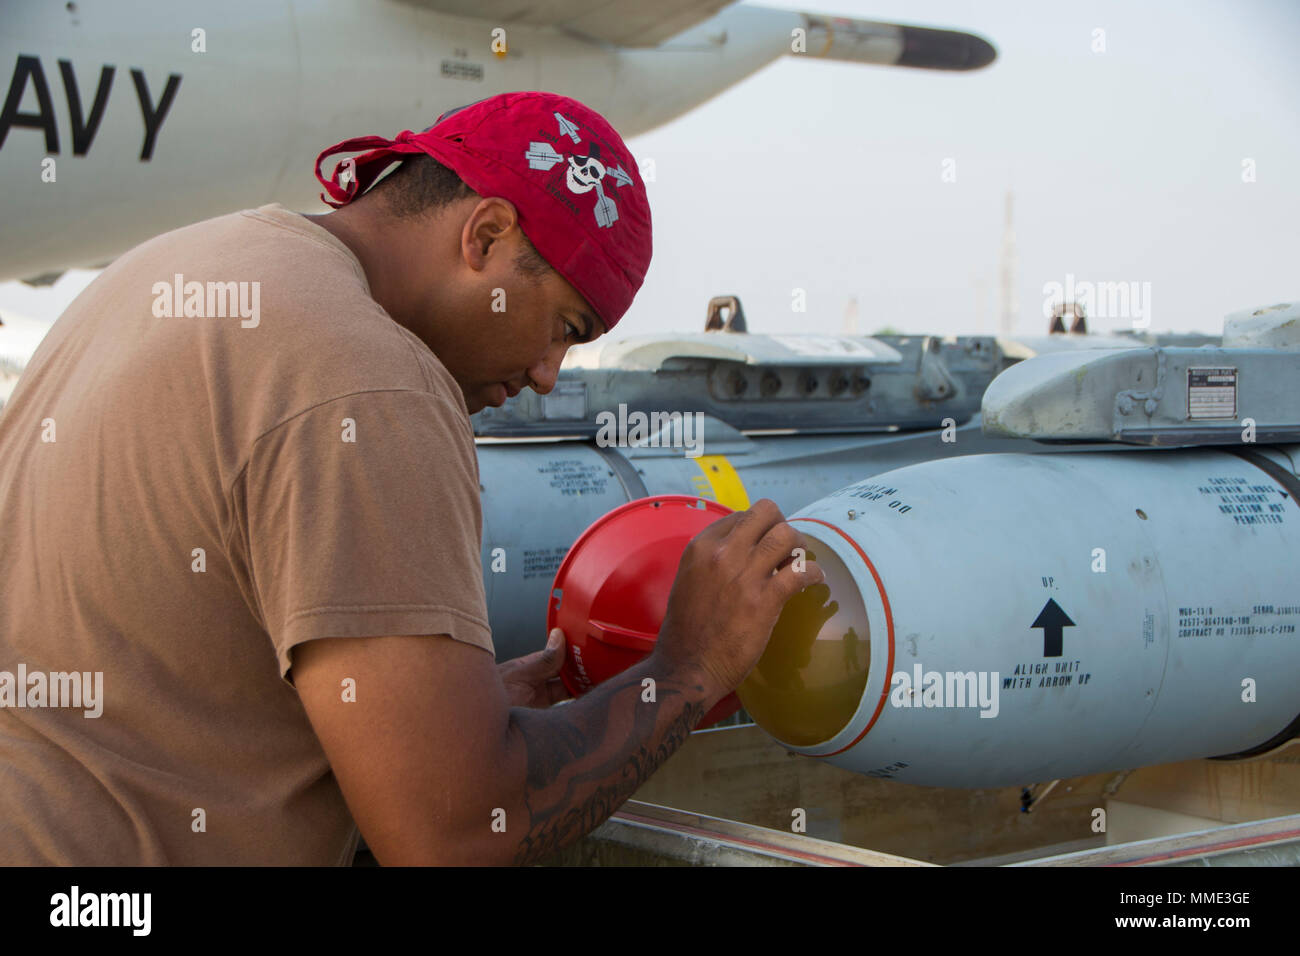 171022-N-CL765 U.S. 5TH FLEET AREA OF OPERATIONS (Oct. 22, 2017) Aviation Ordnanceman 1st Class John Mitchell, assigned to Patrol Squadron (VP) 40, inspects the radome of a AGM-65F missile during a loading evolution with the P-3 Orion aircraft. VP-40 is currently deployed to the 5th, 6th and 7th fleet areas of operations. (U.S. Navy Photo by Mass Communication Specialist 3rd Class Jakoeb Vandahlen/Released) Stock Photo